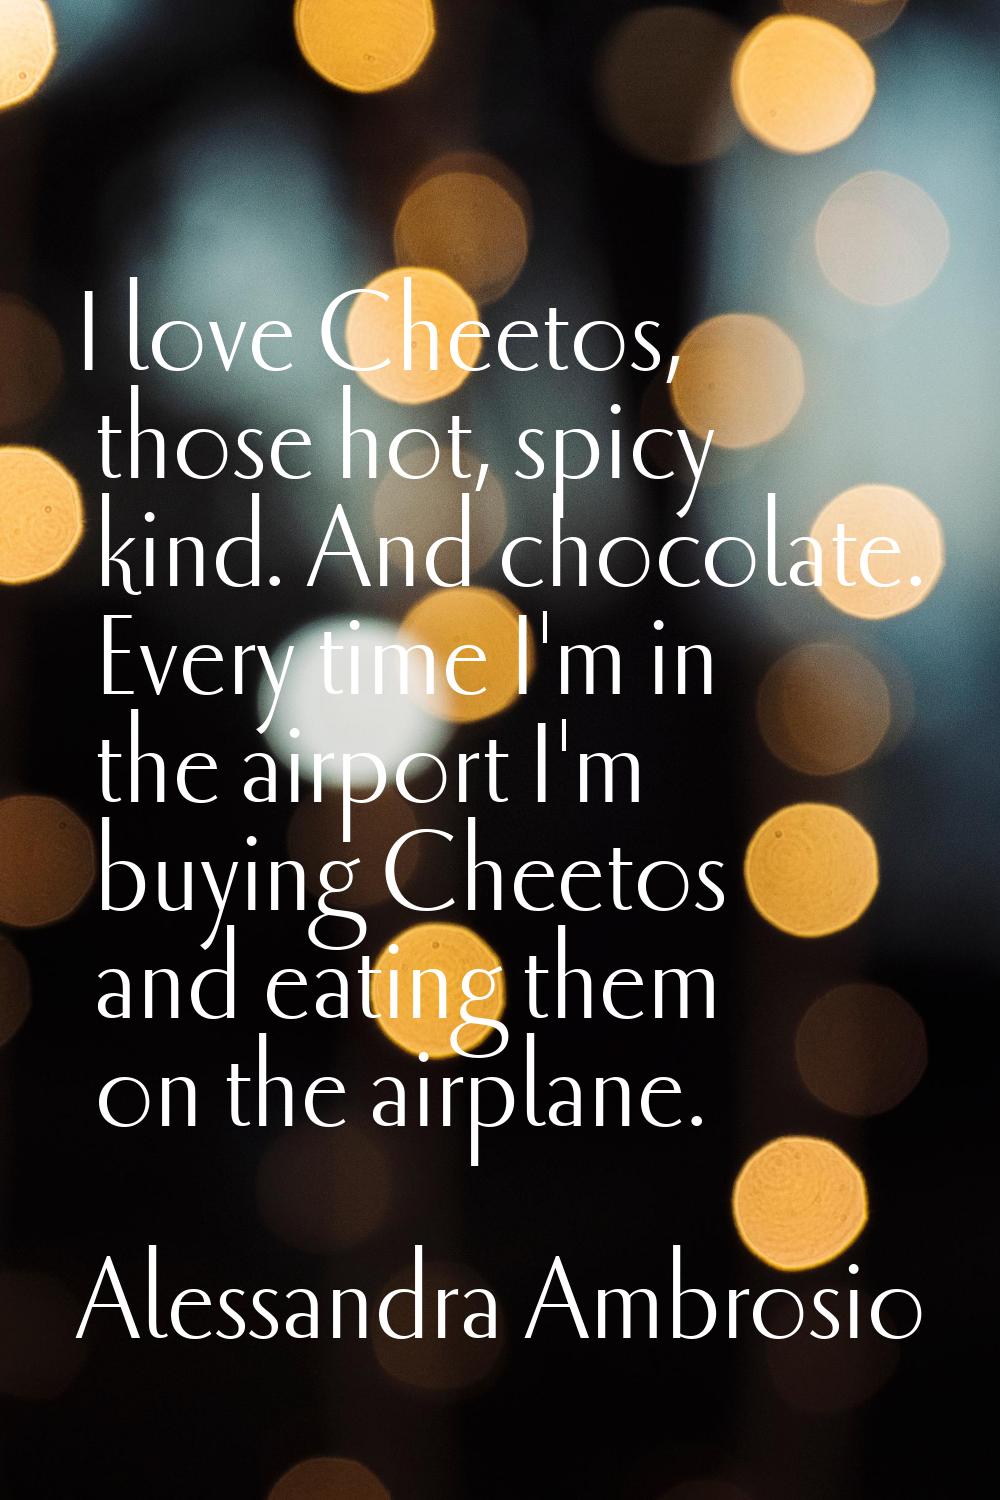 I love Cheetos, those hot, spicy kind. And chocolate. Every time I'm in the airport I'm buying Chee